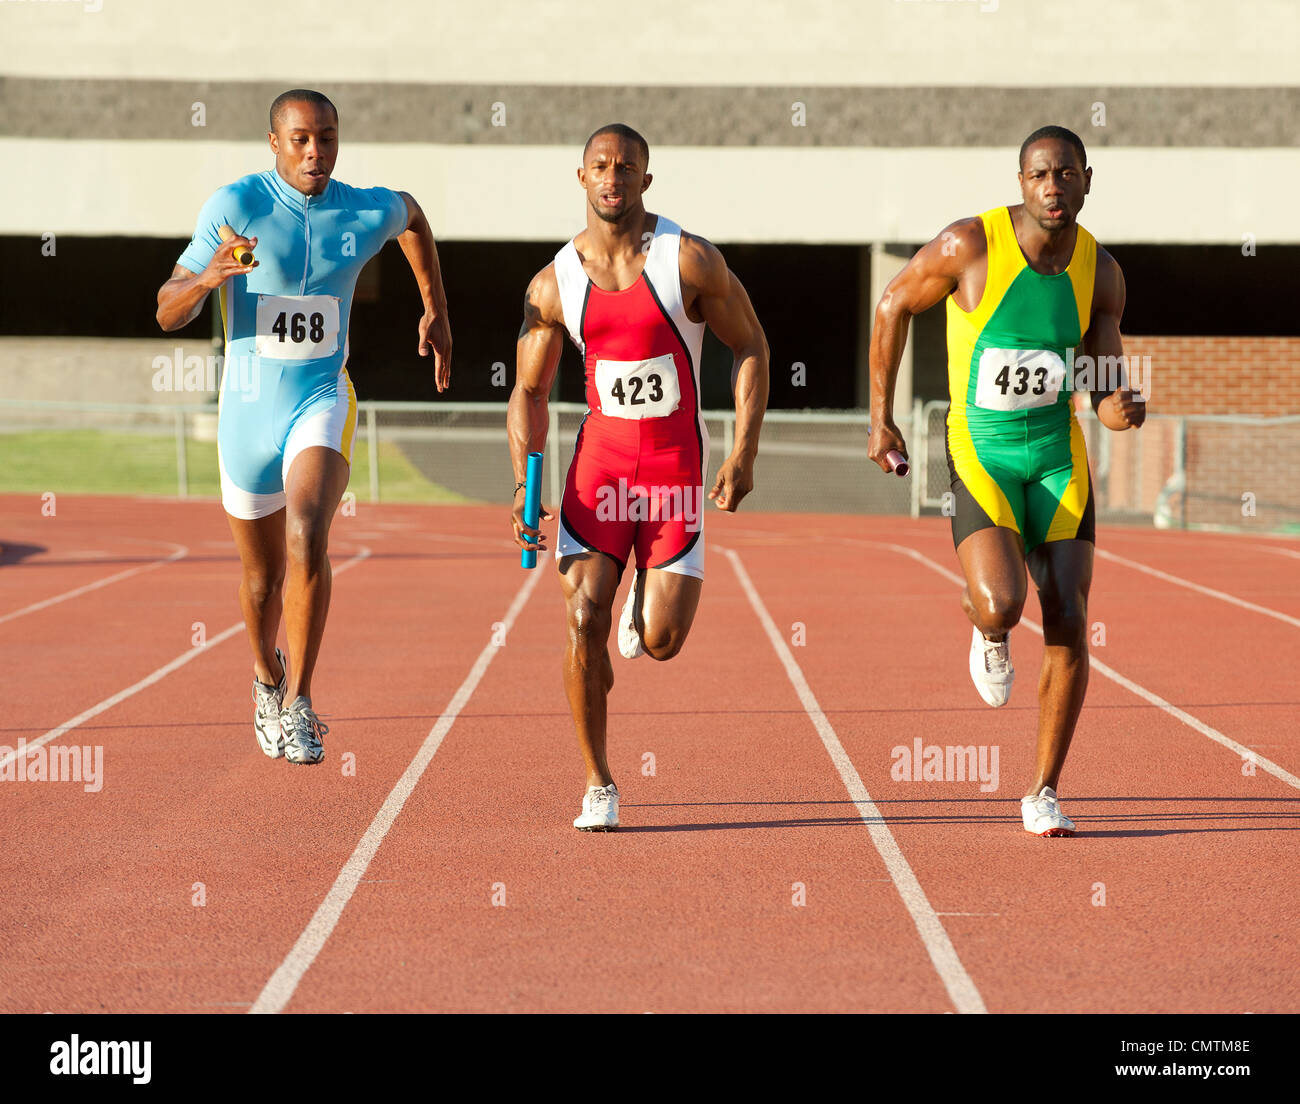 Runners running on track in relay race Stock Photo